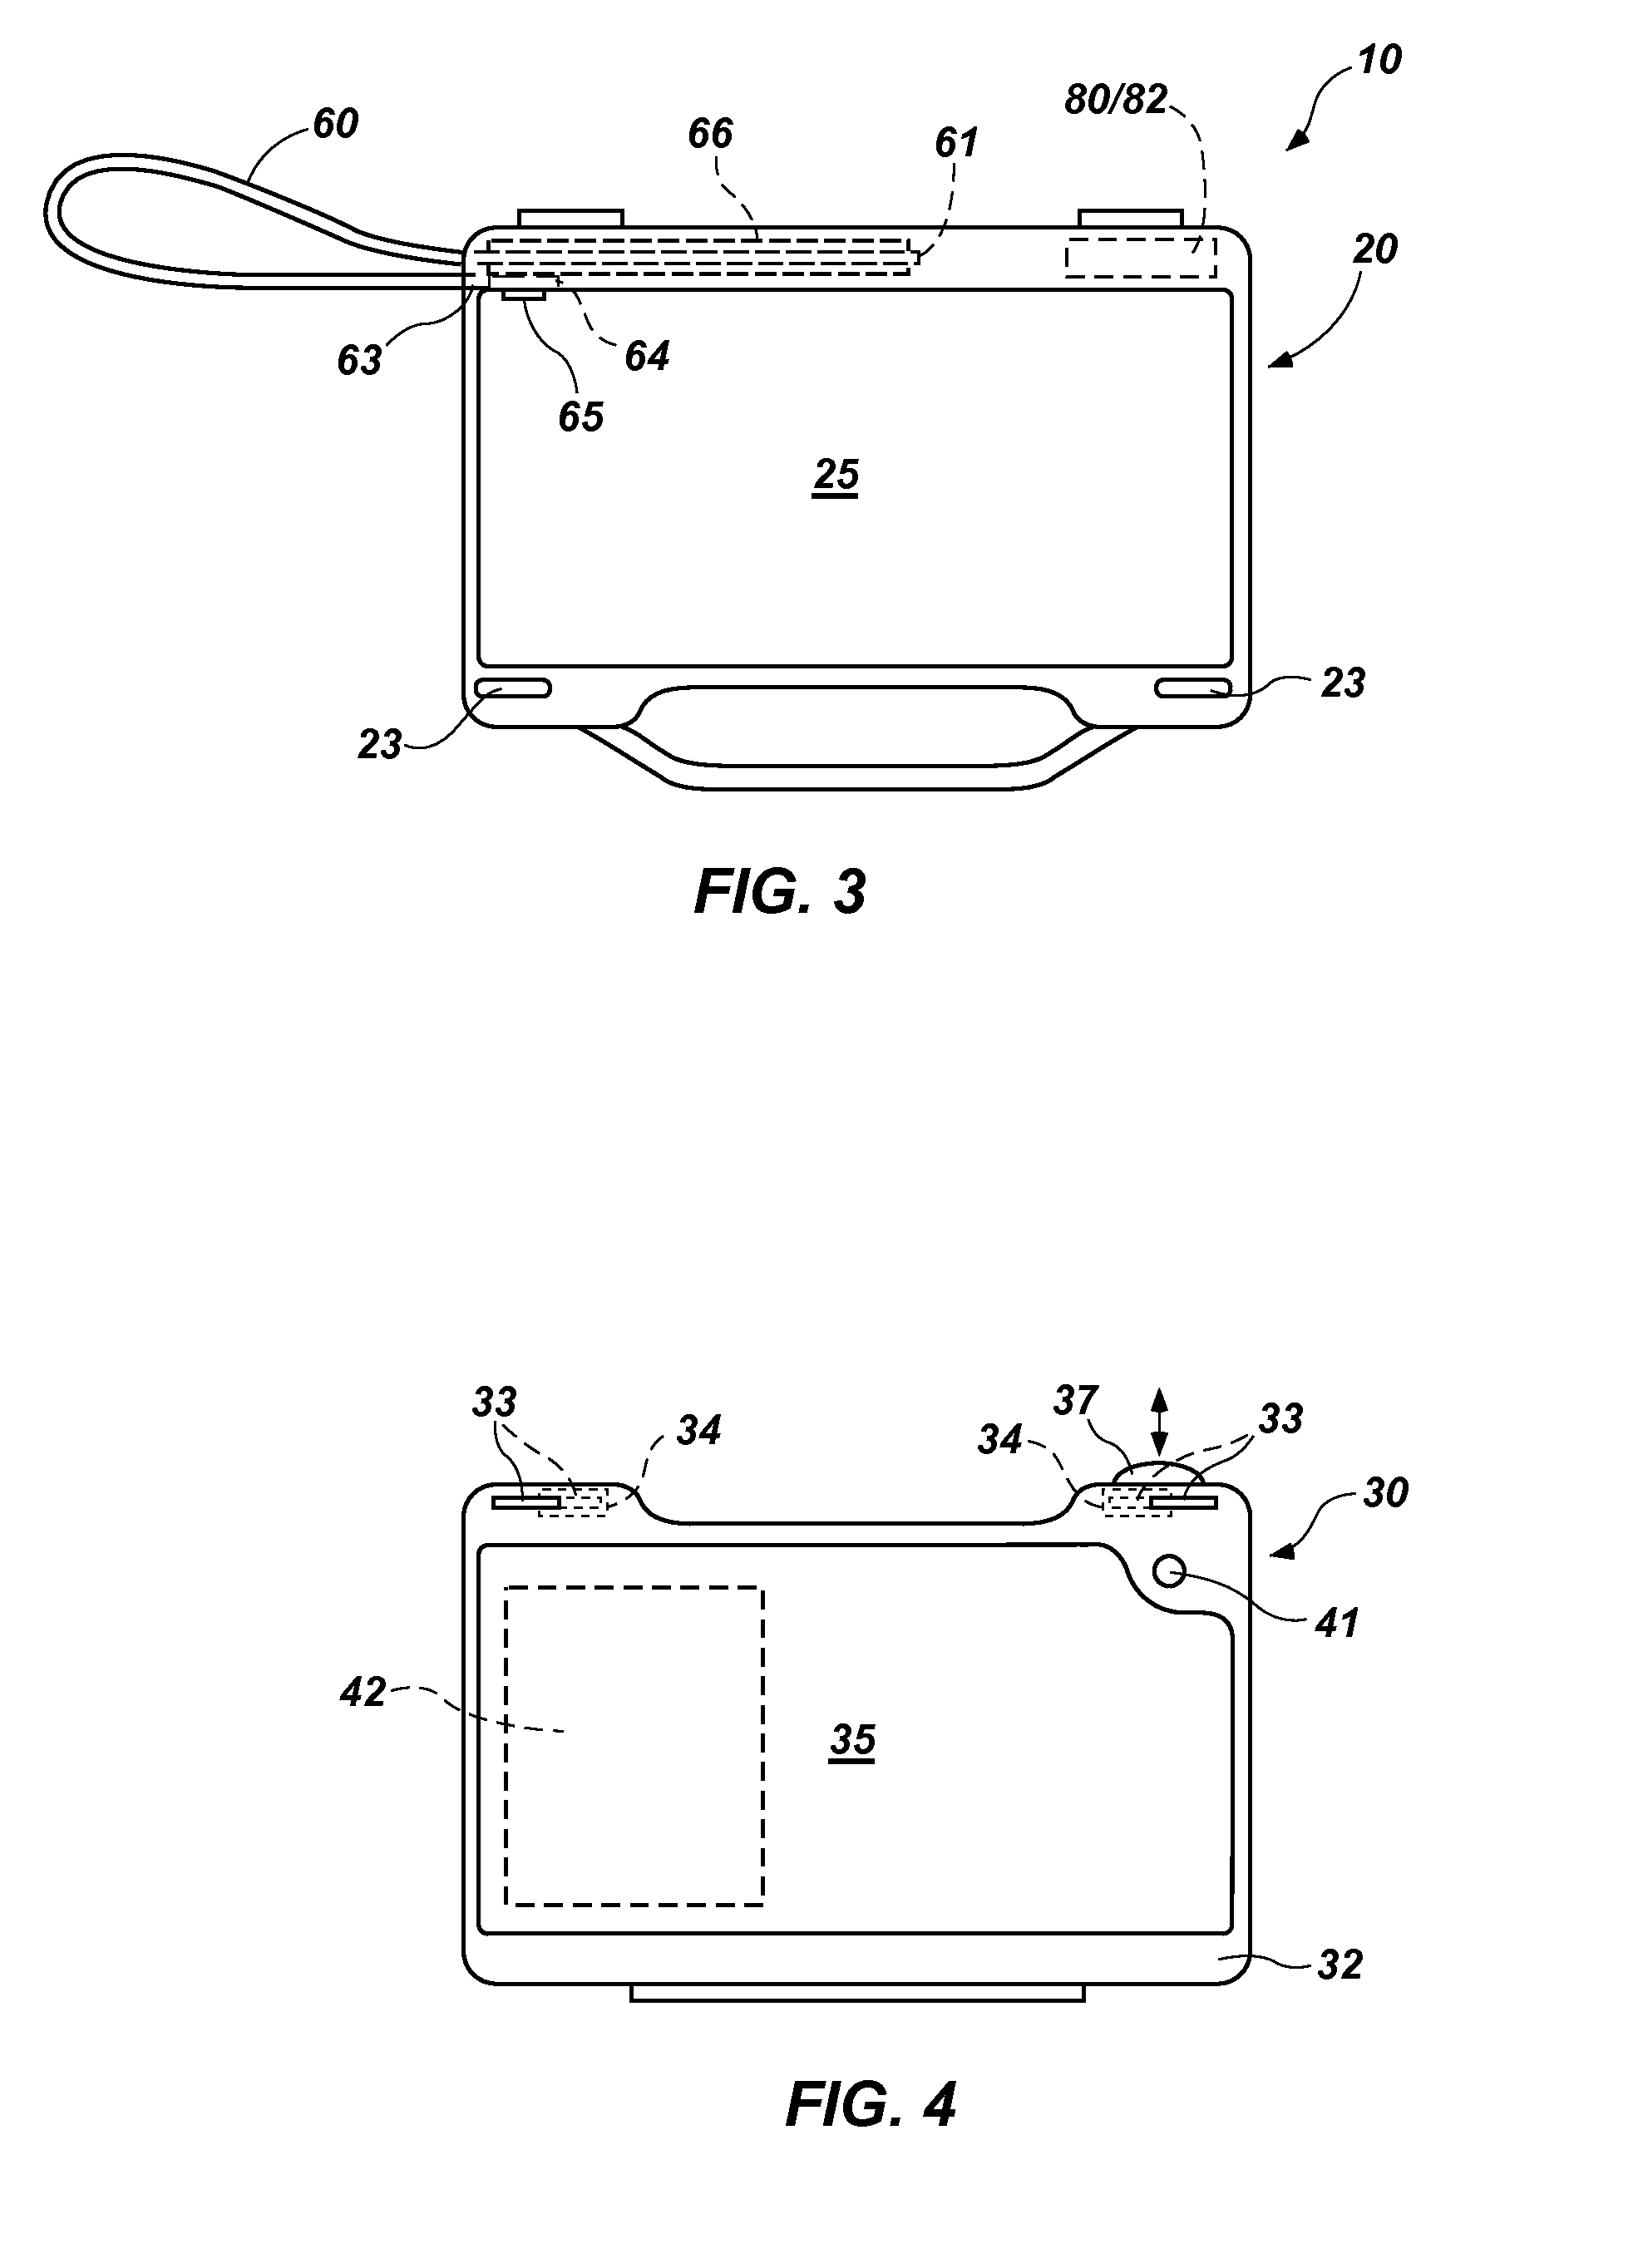 Portable safe, systems and methods